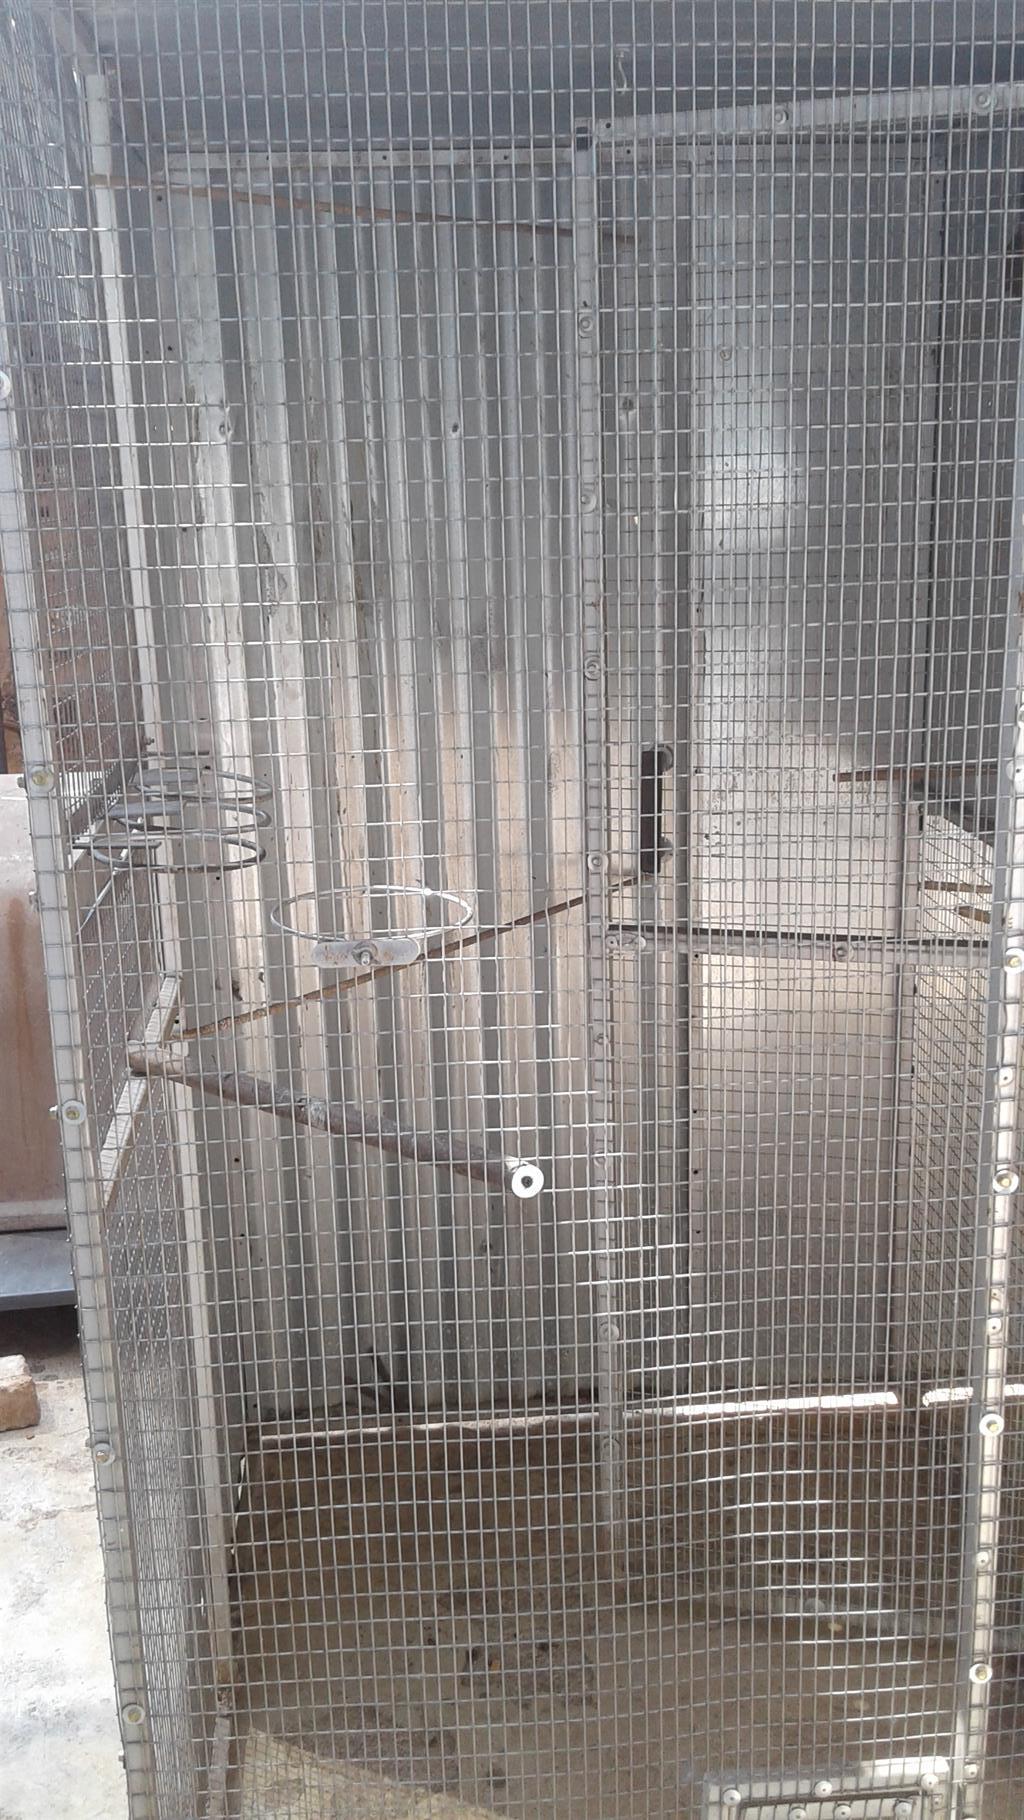 Bird cage for sale.